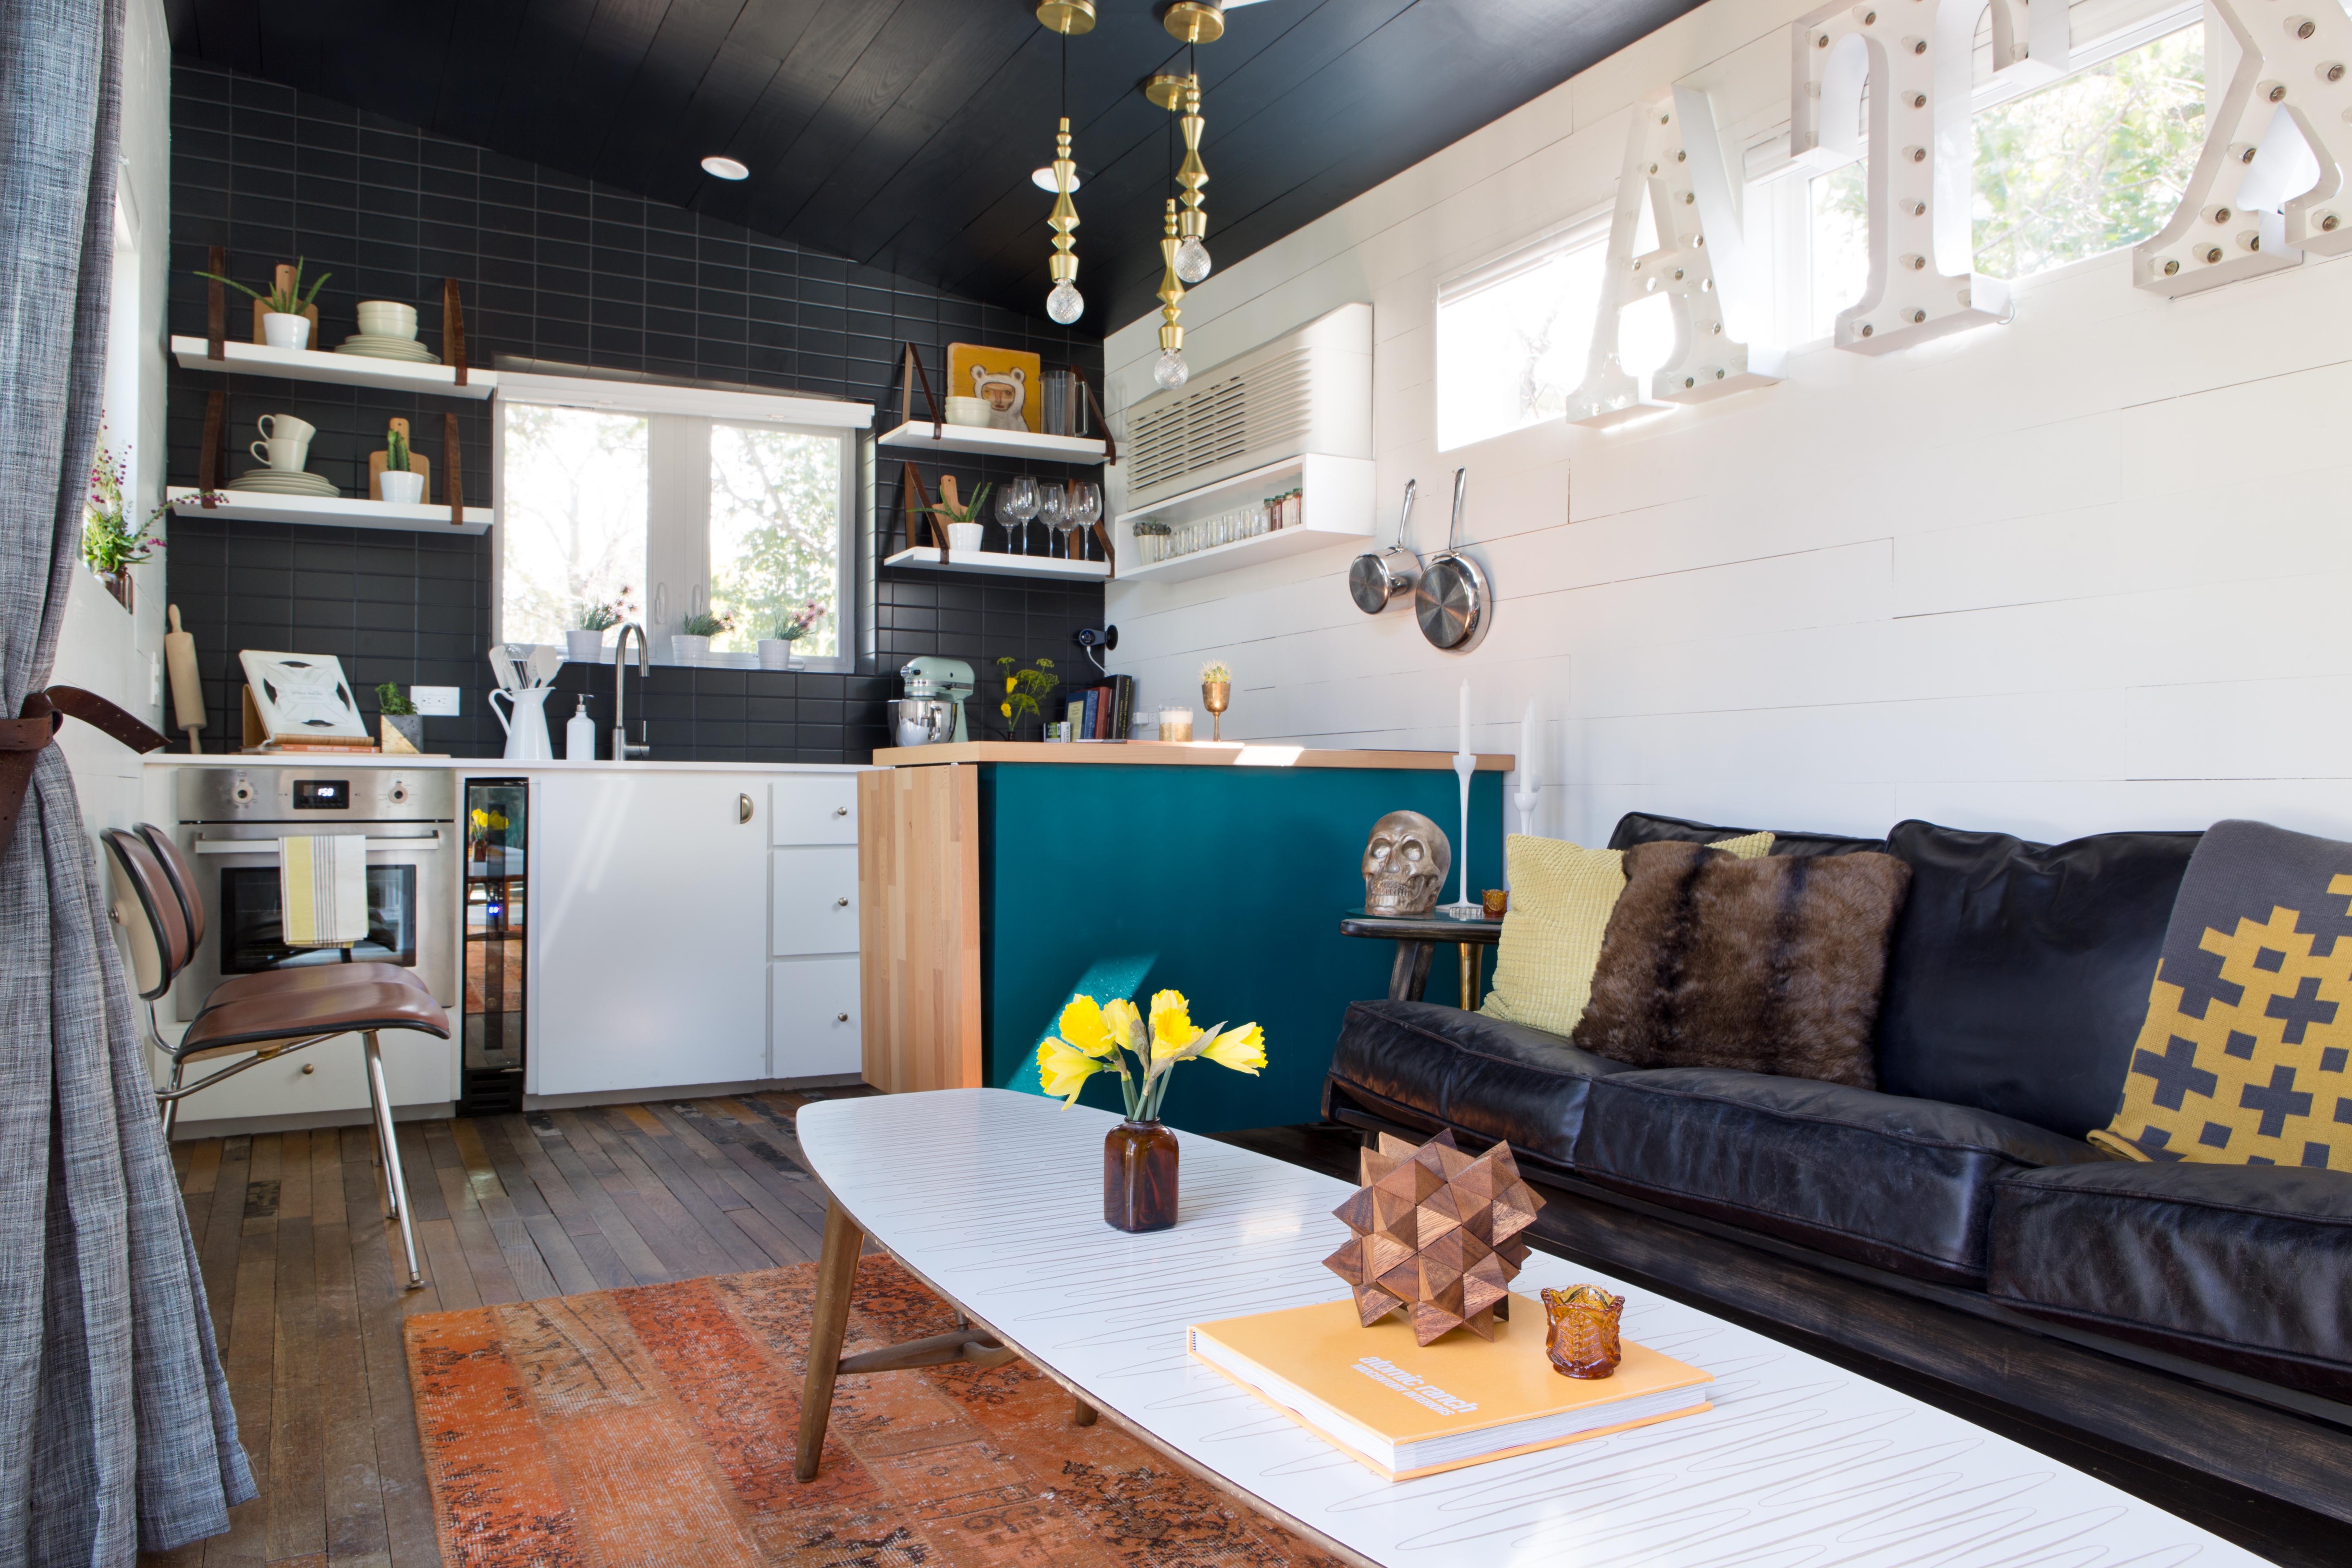 Packing big design in tiny homes